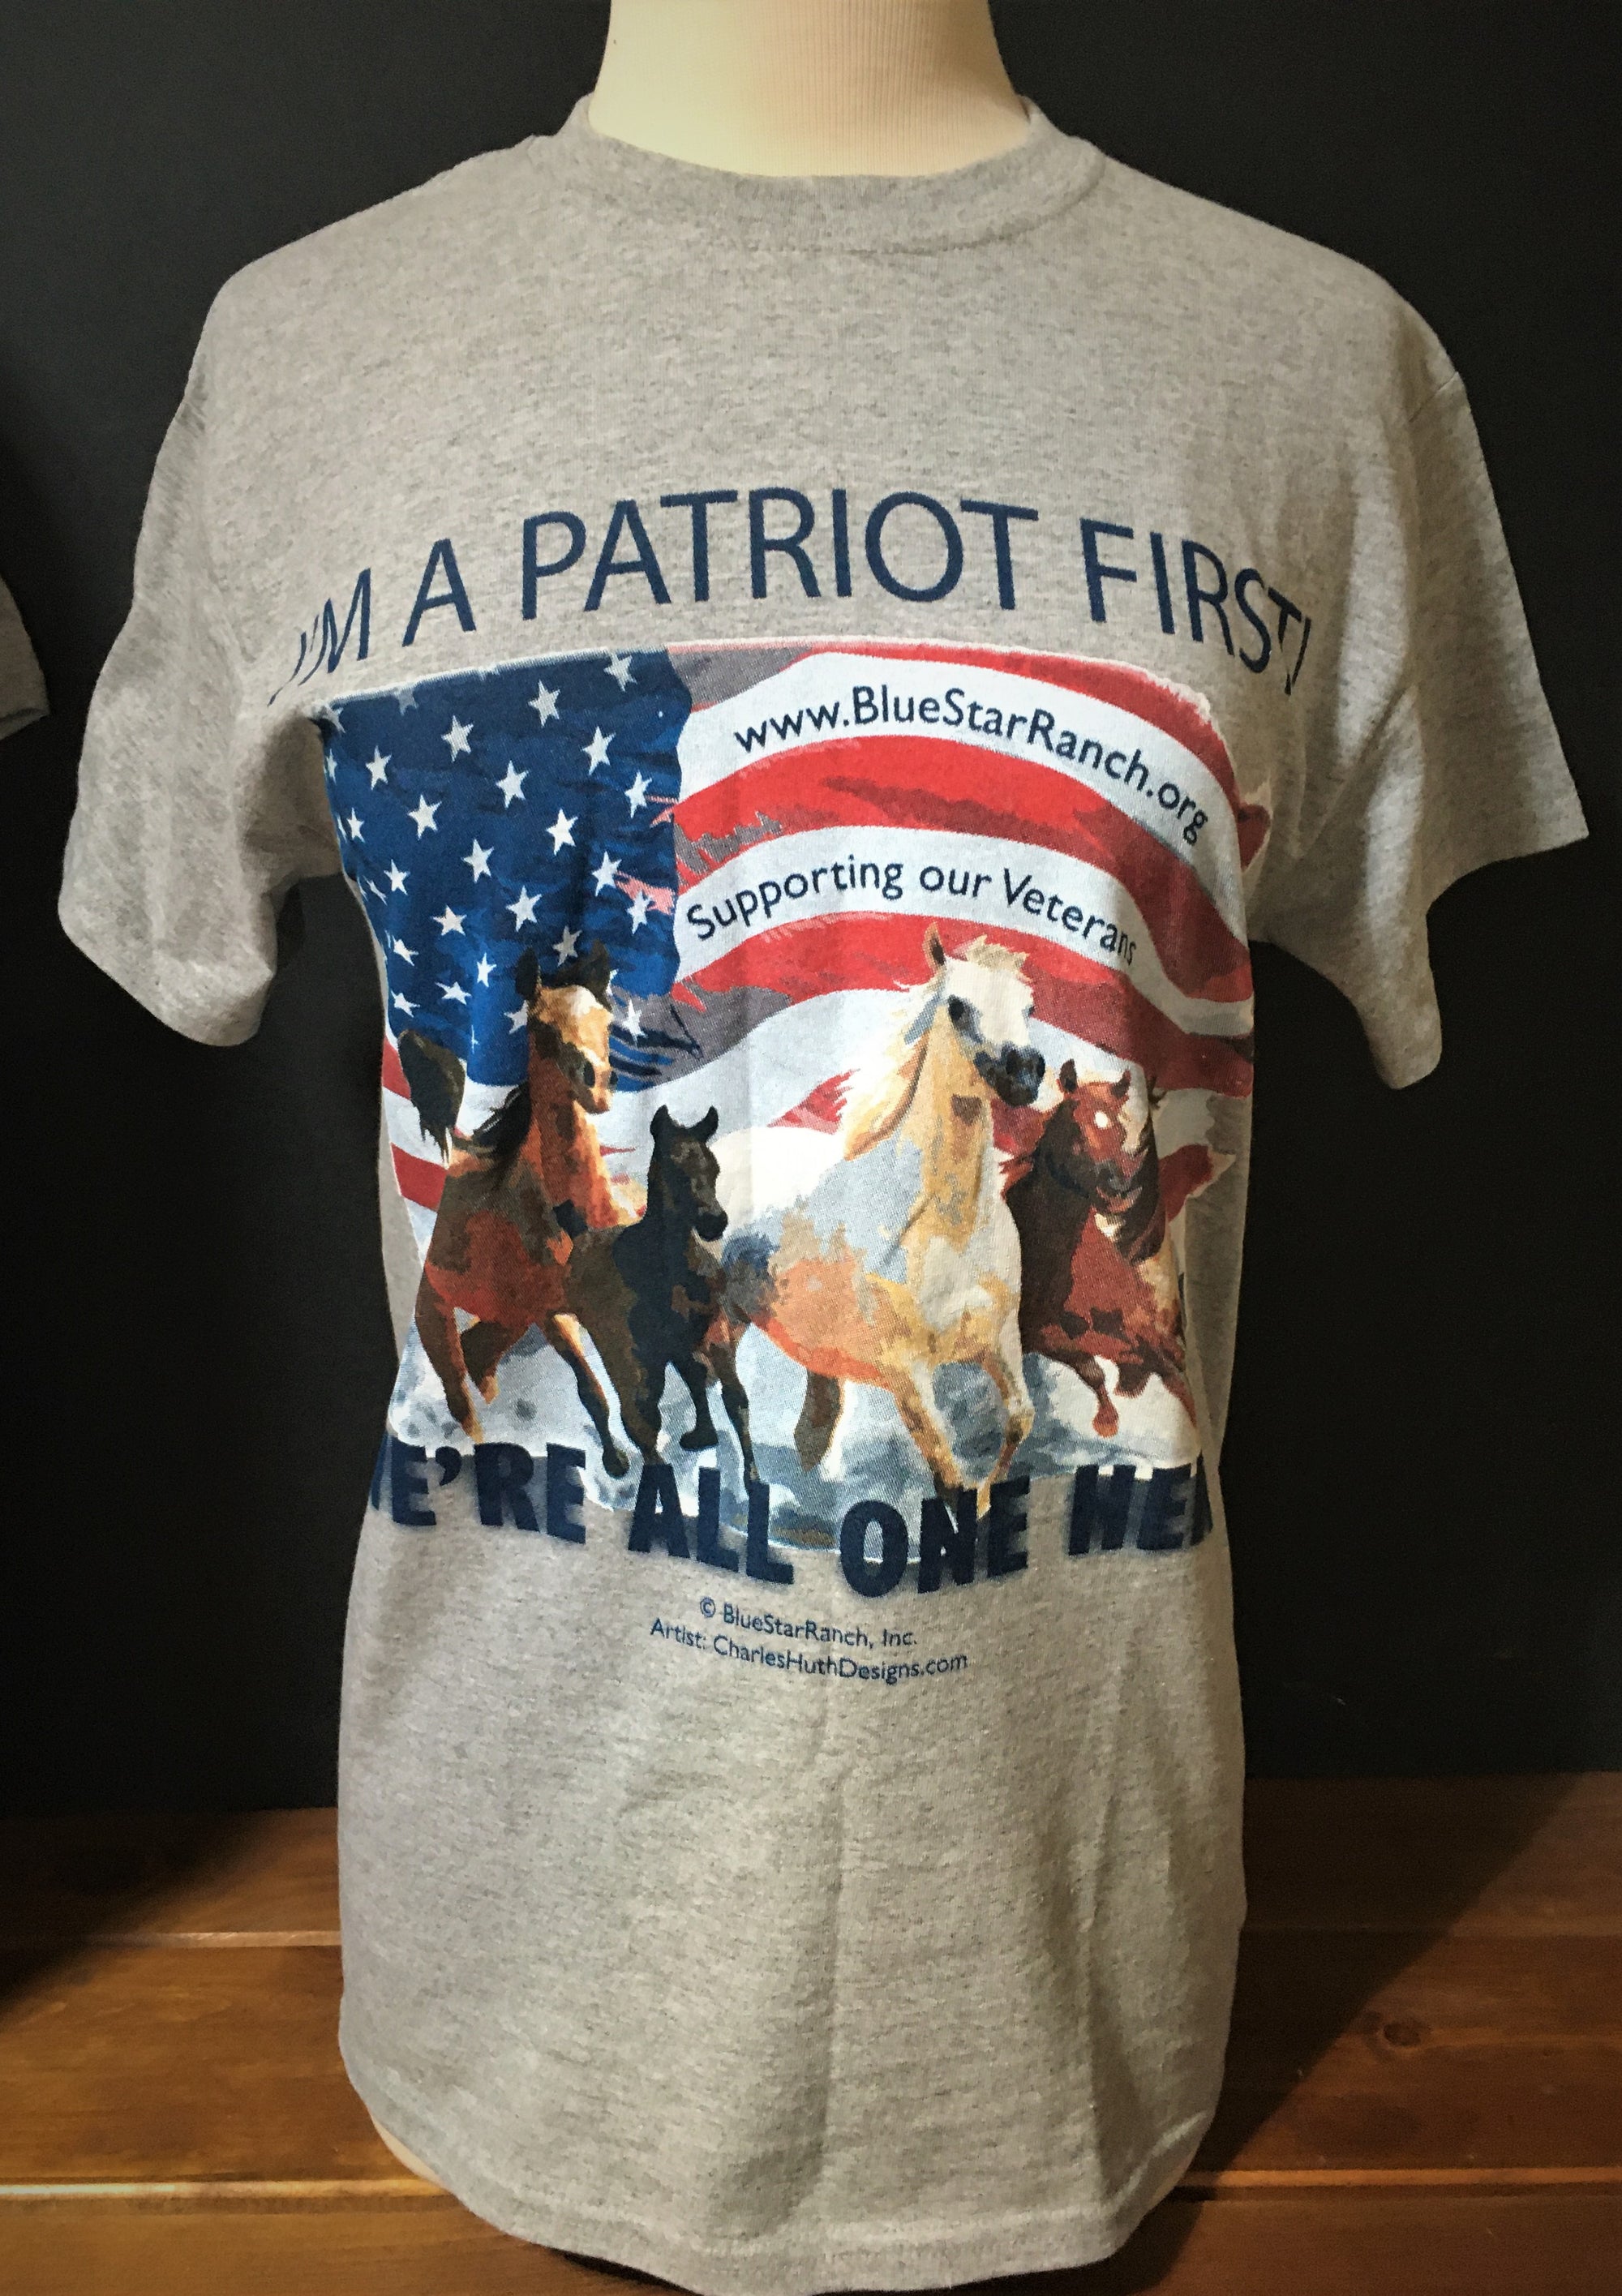 Unisex Men's and Ladies' Blue Star Ranch Tee Shirts on Male Mannequin